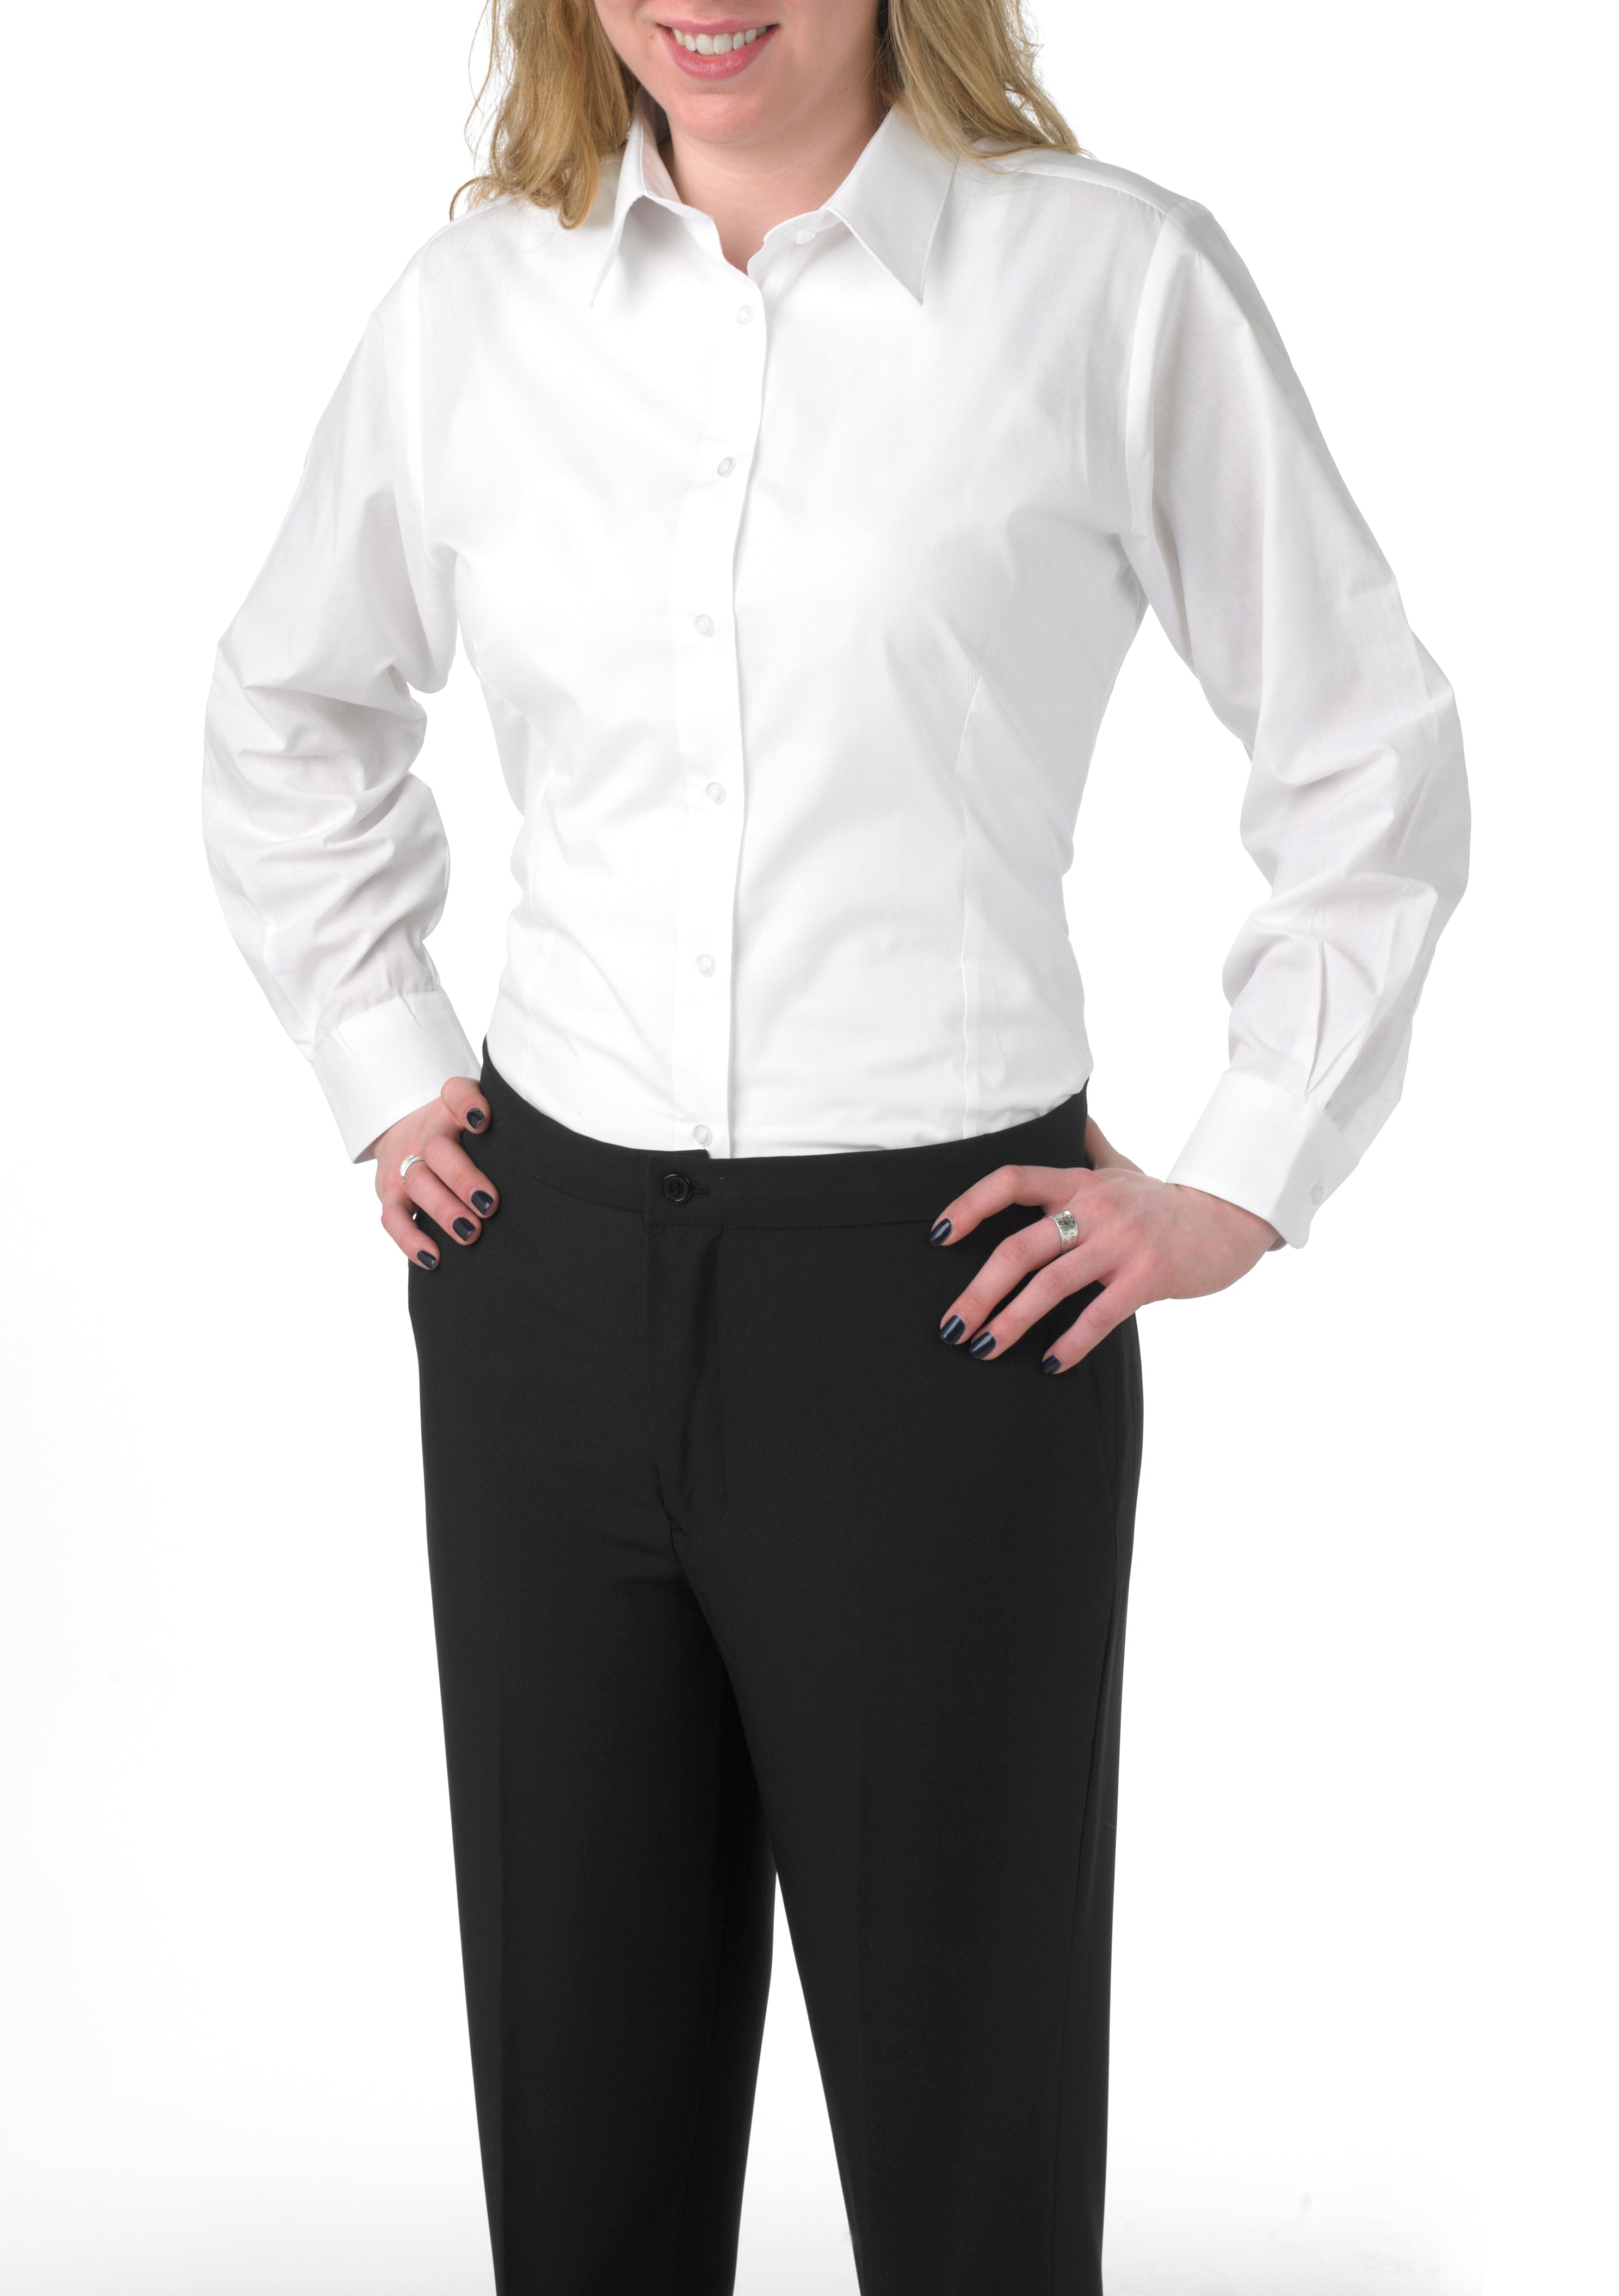 Women's White, Long-Sleeve Form-Fitted Dress Shirt - 99tux